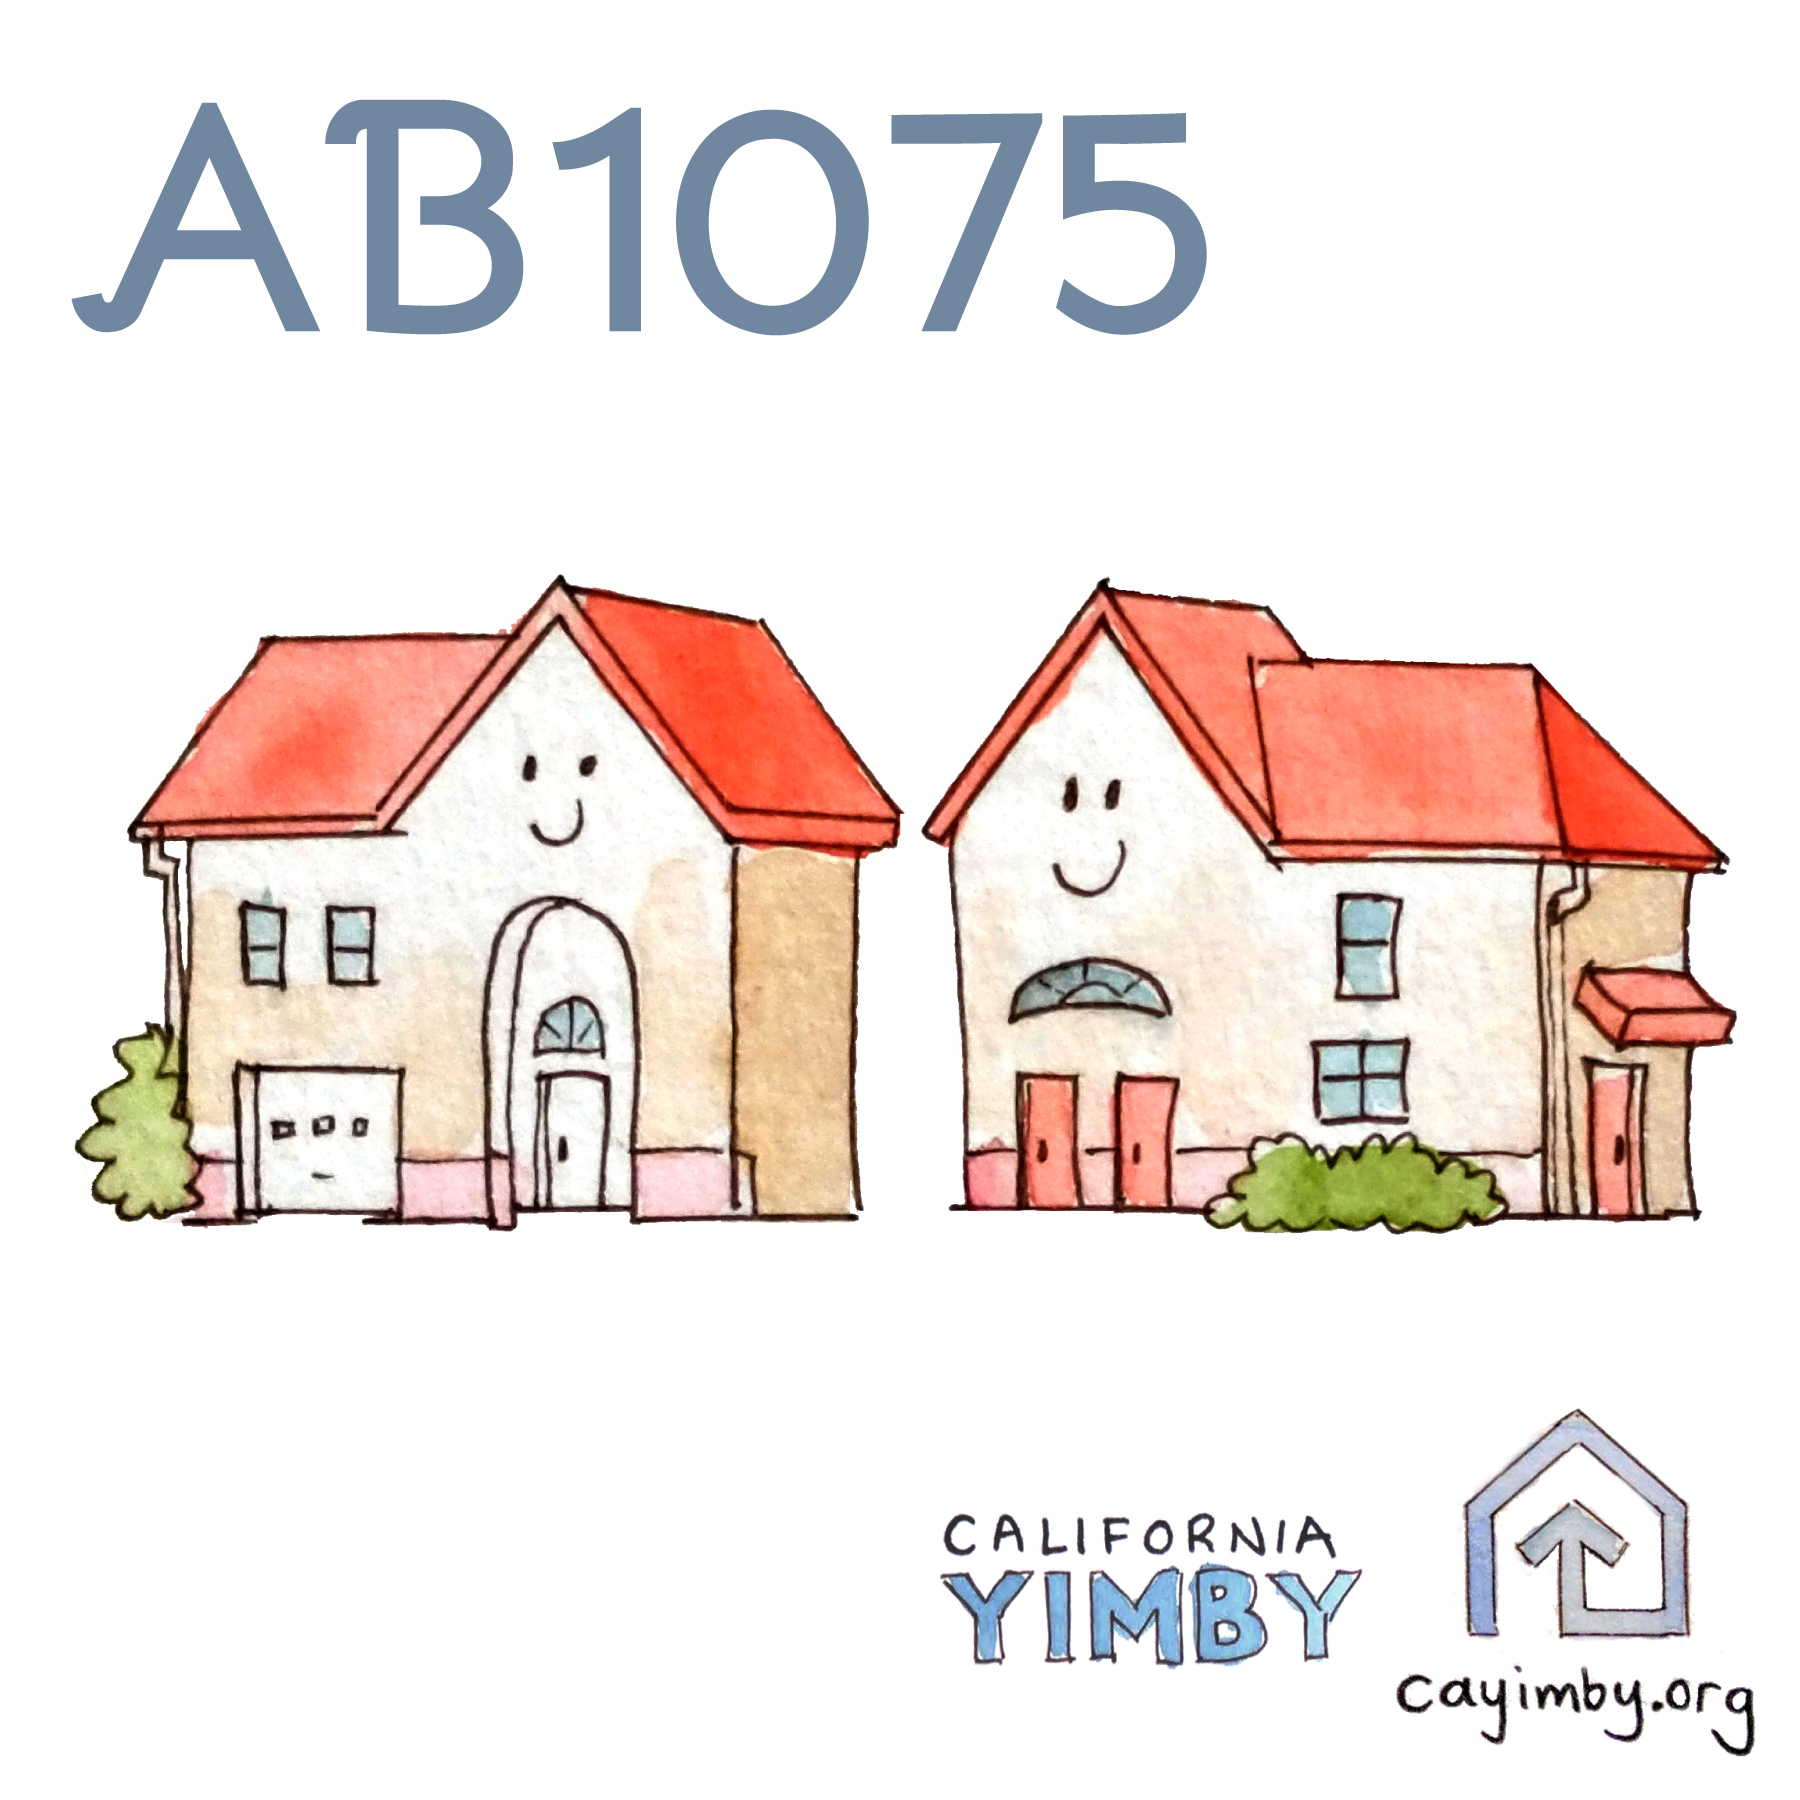 AB 1075 - Missing Middle Zoning Reform